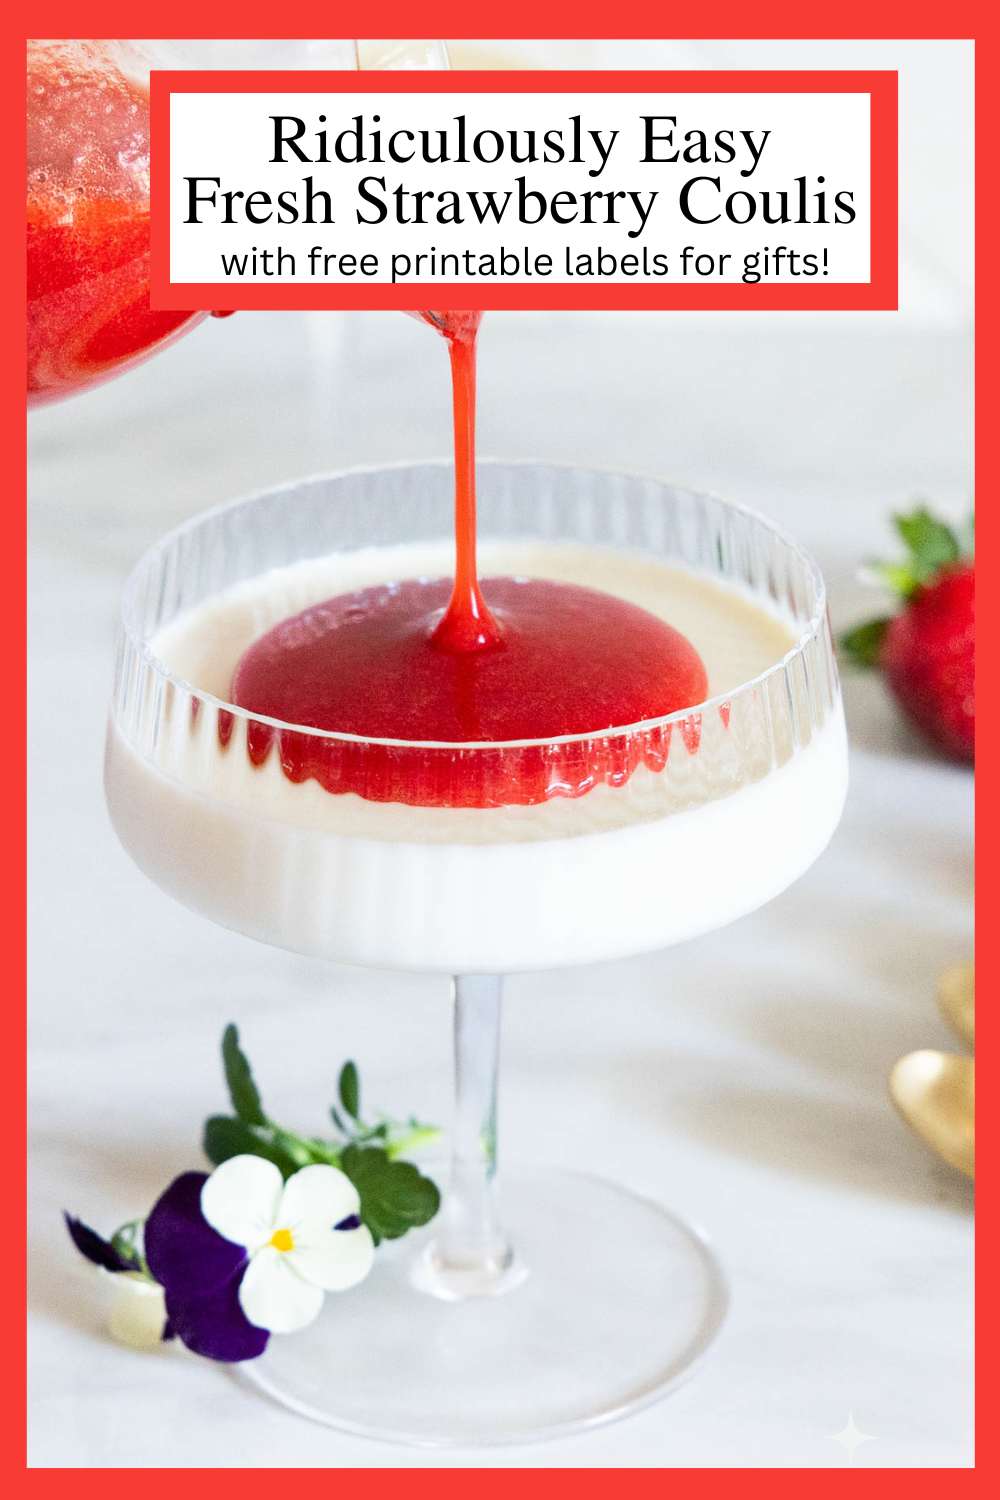 Ridiculously Easy Strawberry Coulis (with free printable labels for gifts)